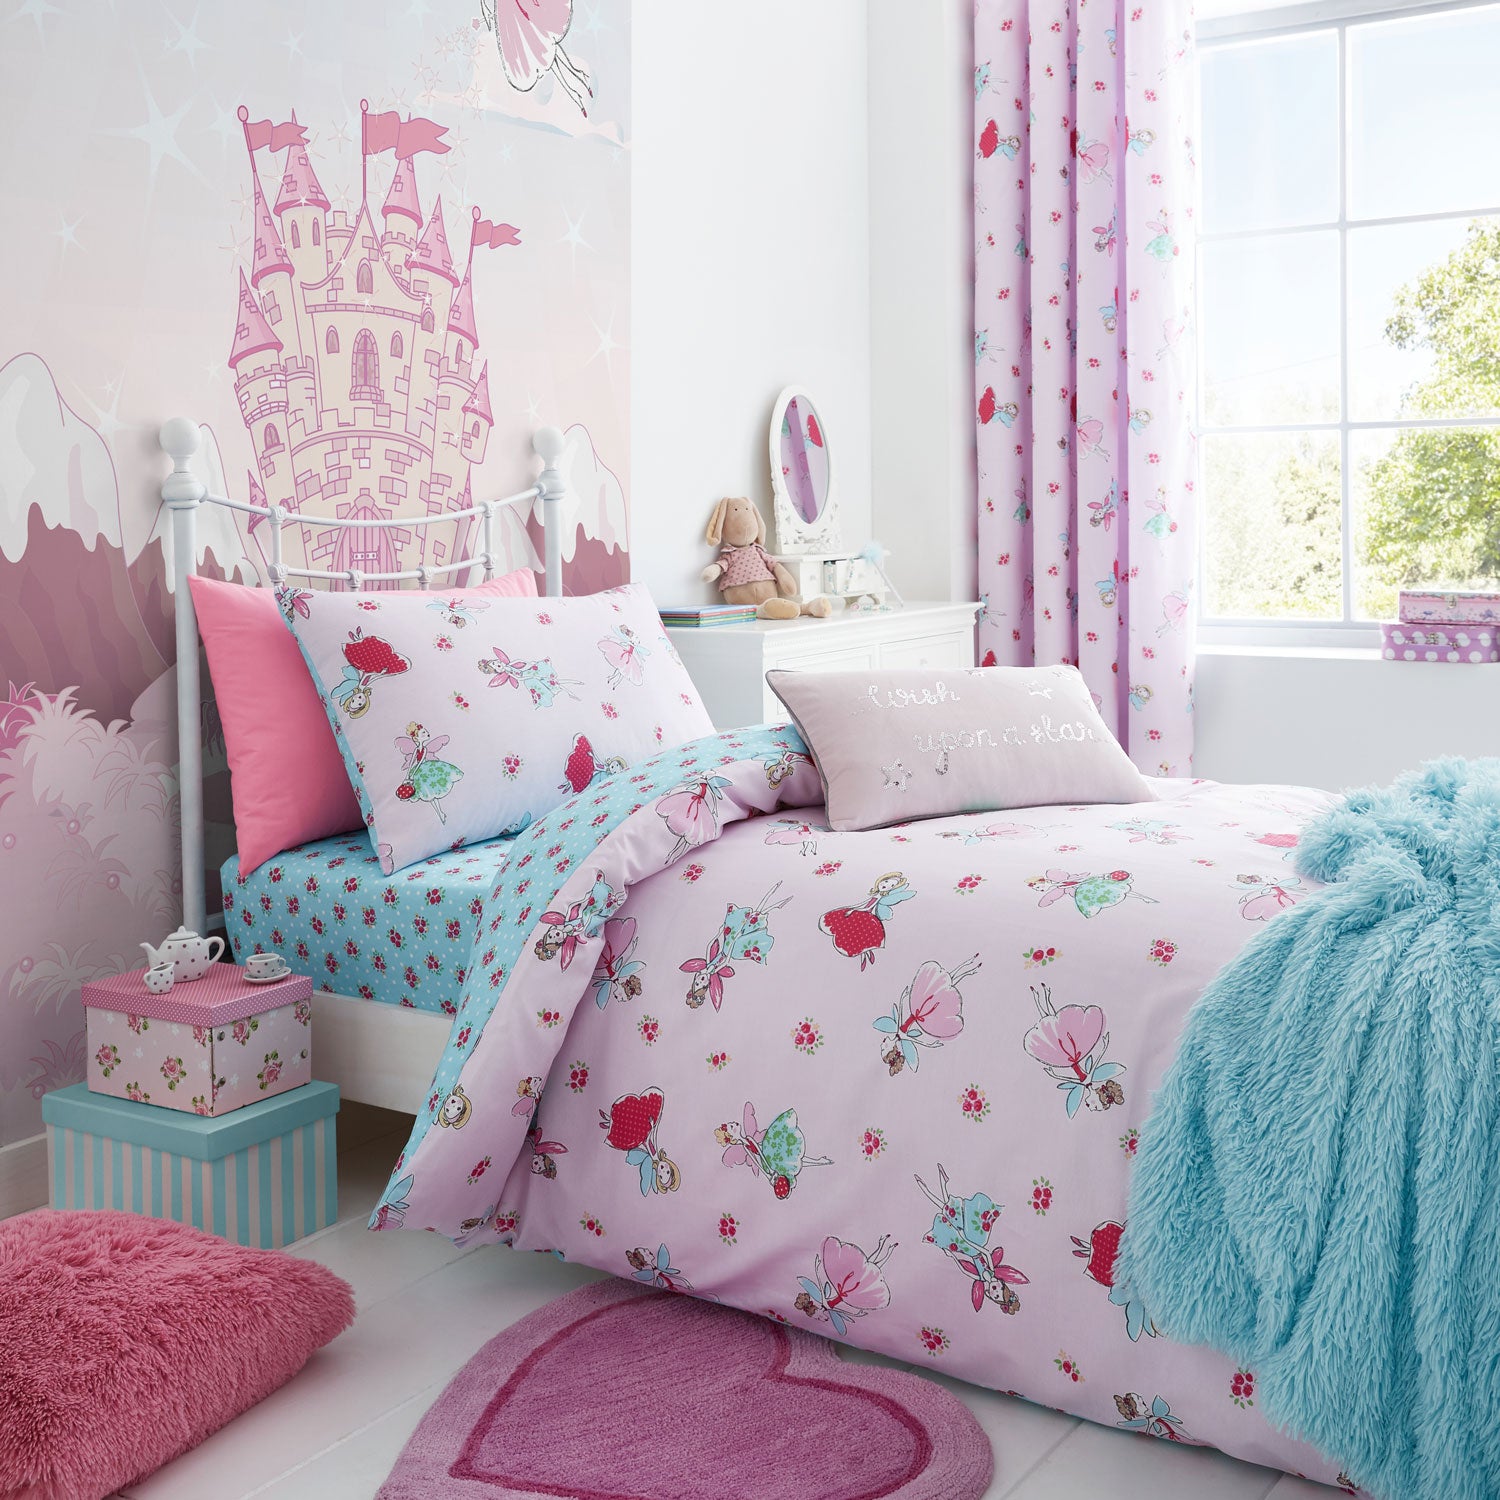  Catherine Lansfield Fairies Duvet Cover Set - Pink 1 Shaws Department Stores